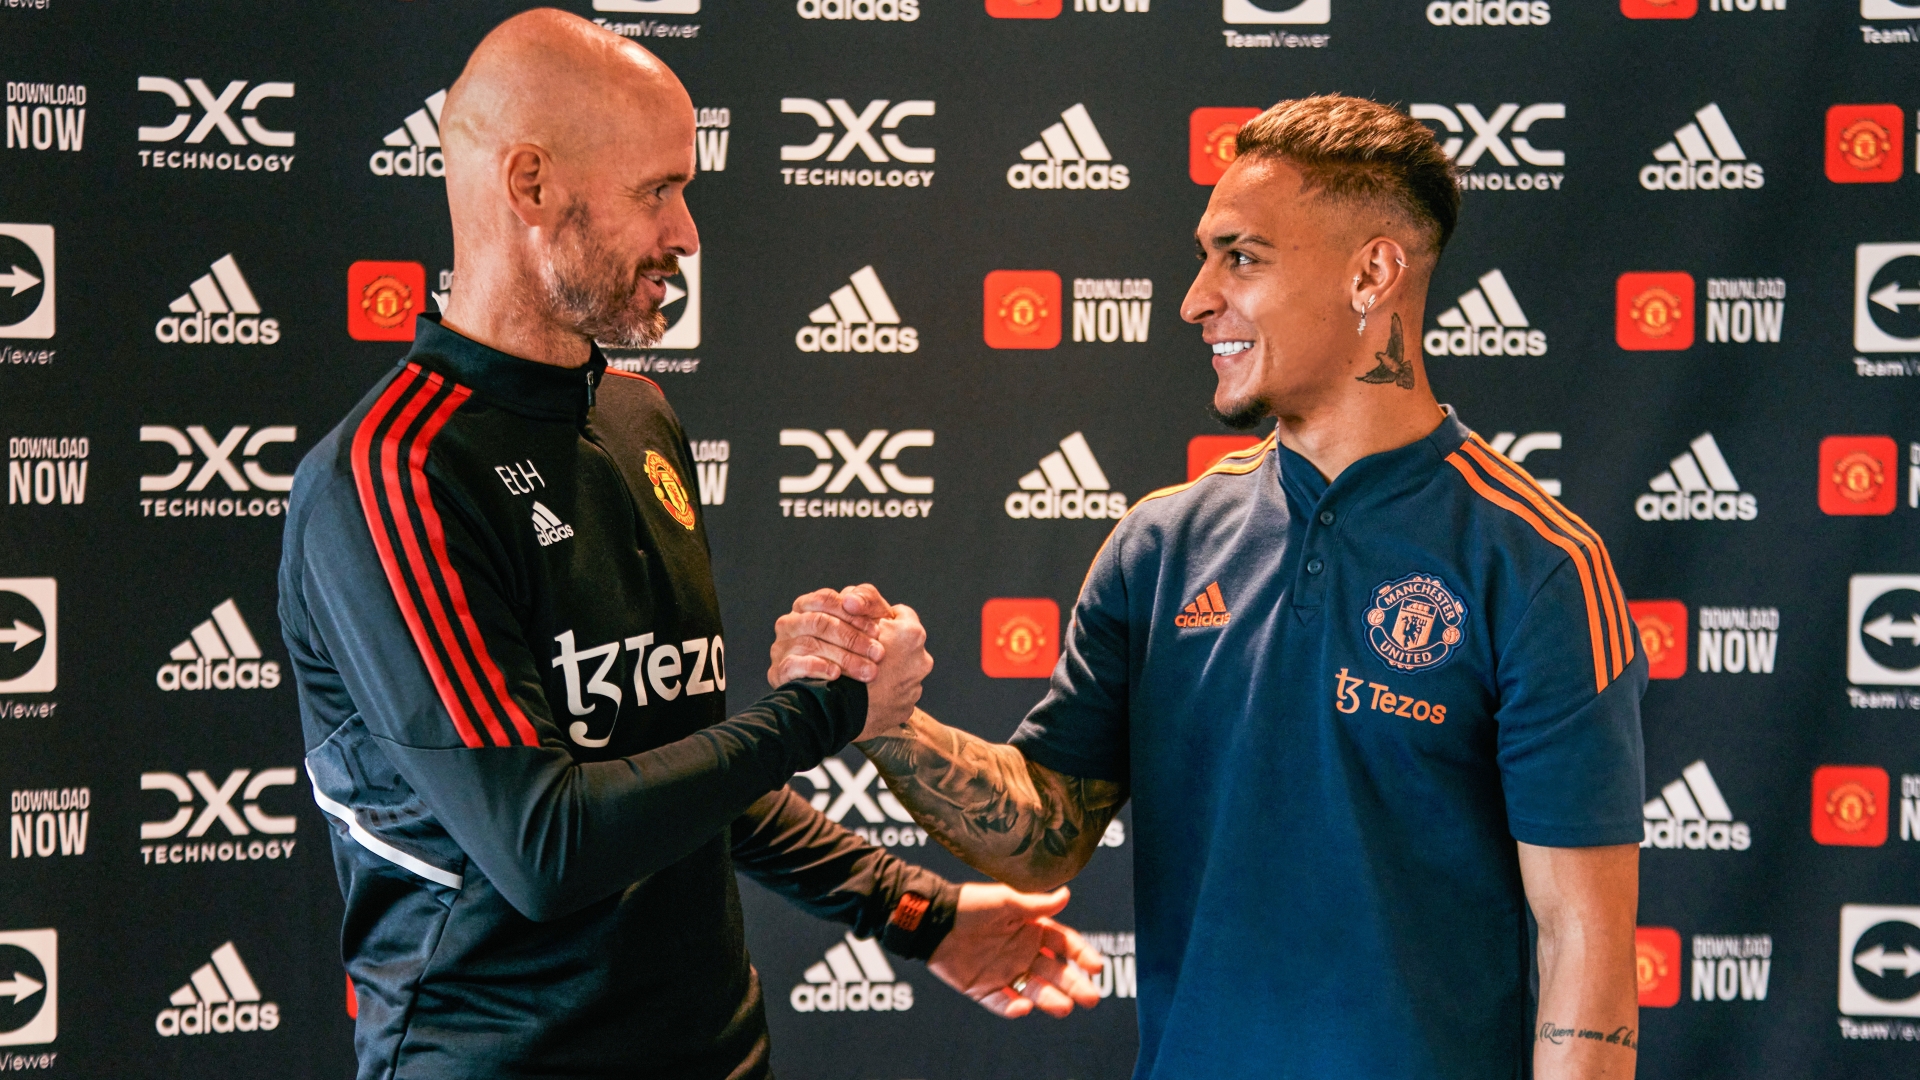 Manchester United Confirm Antony Transfer As Winger Joins From Ajax On Five Year Deal In Second Most Expensive Deal In Premier League Club's History Behind Only Paul Pogba